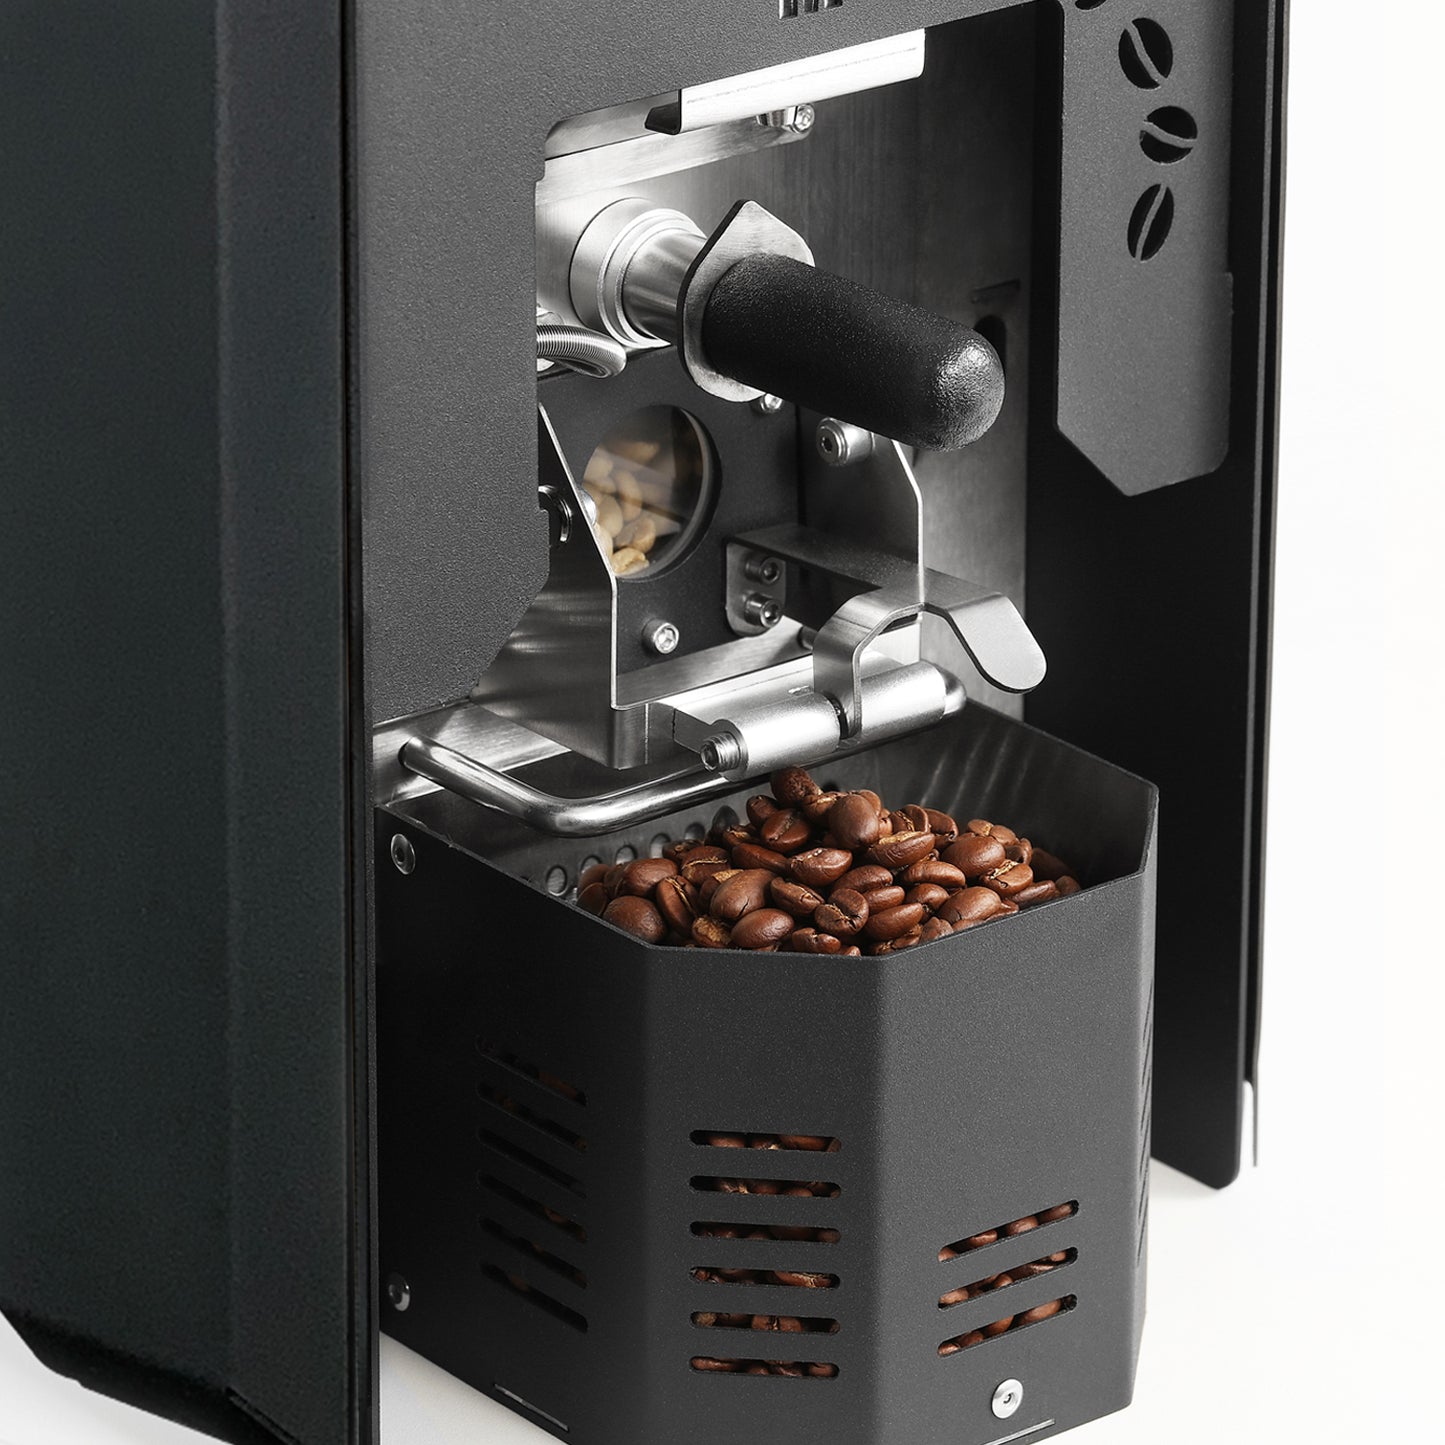 Kaleido Sniper M1S Dual system Electric Heating Professional Coffee Roaster(Kaleido System+ArtisanControl)- Direct Fire Heating and Hot Air Circulation System (50-200g)